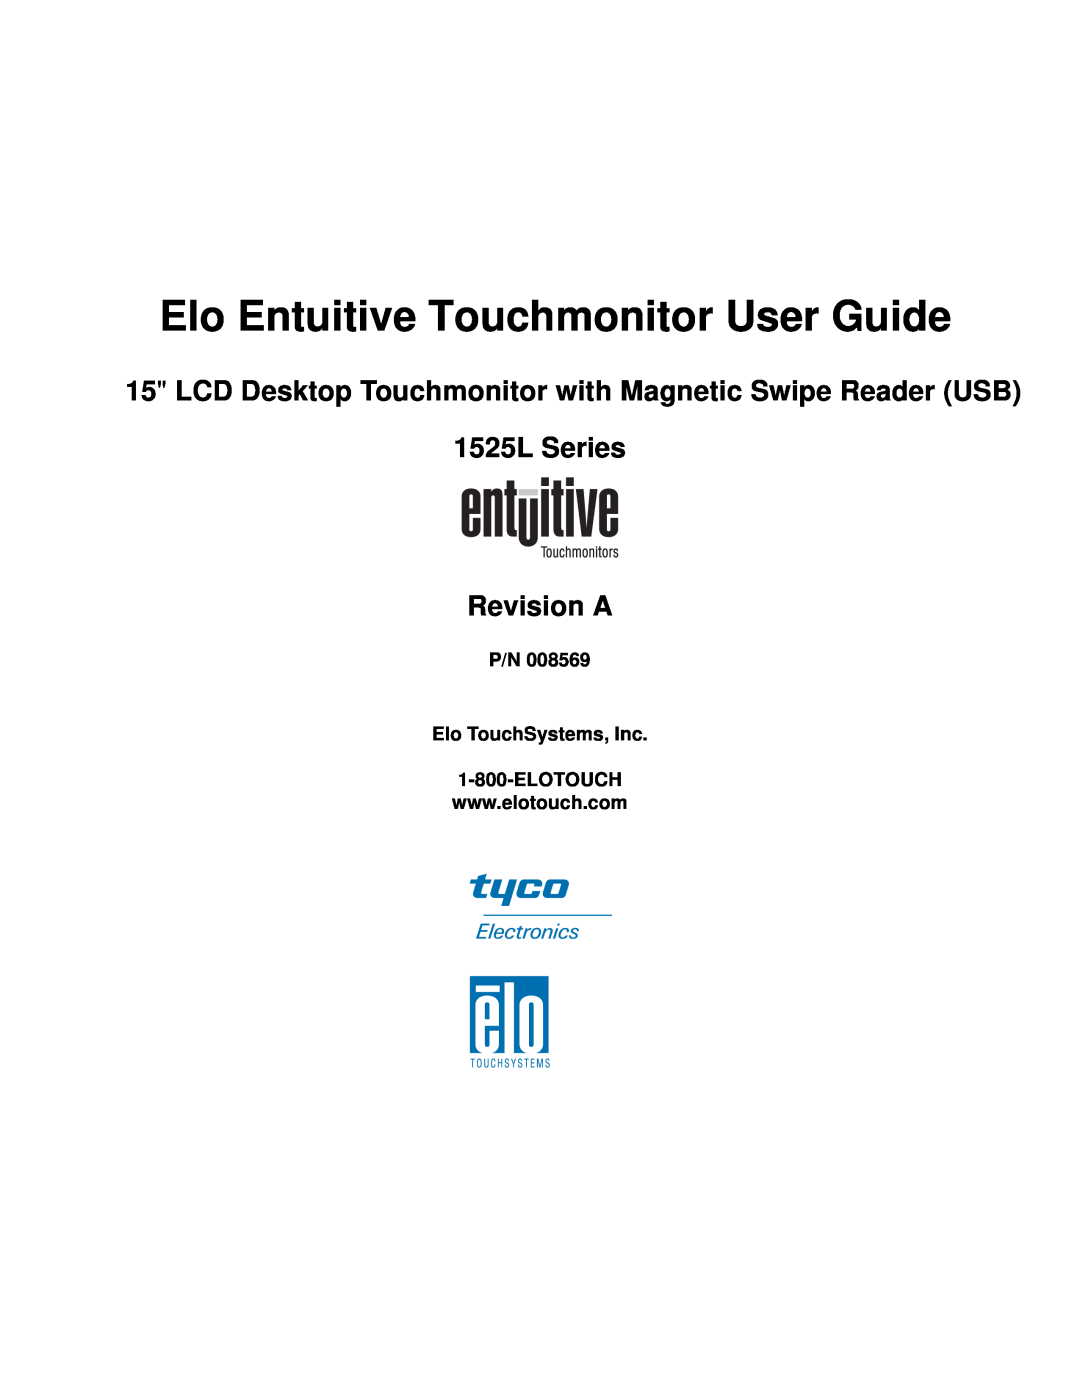 Elo TouchSystems 1525L manual Elo Entuitive Touchmonitor User Guide, Revision A, P/N Elo TouchSystems, Inc 